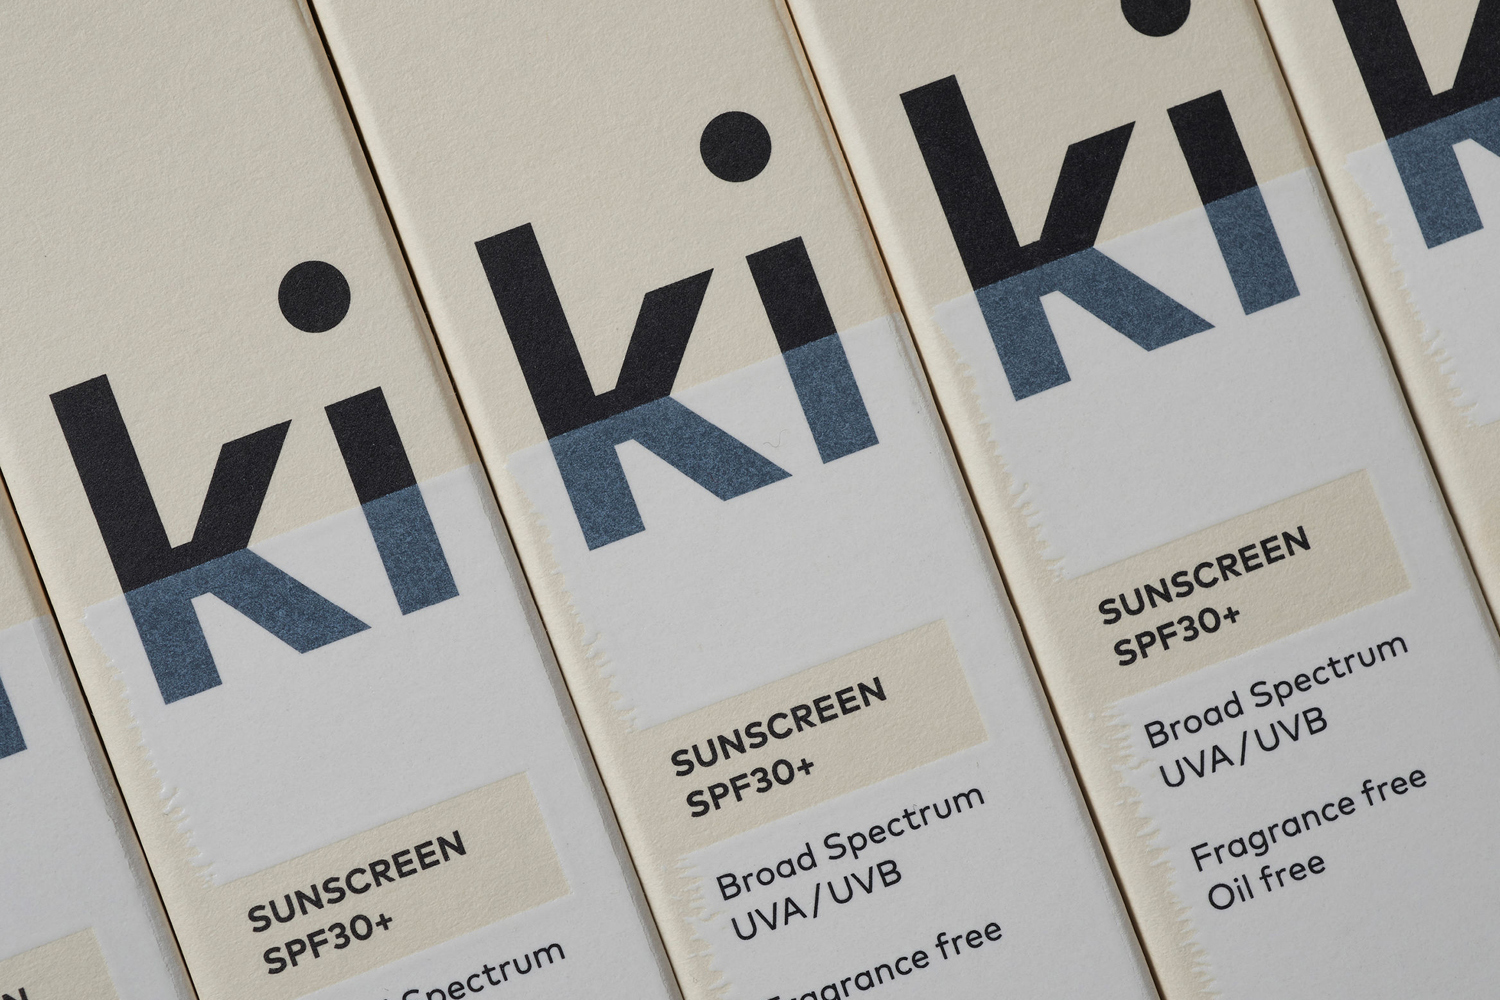 Material Thinking in Packaging — Ki Sunscreen by Akin, New Zealand